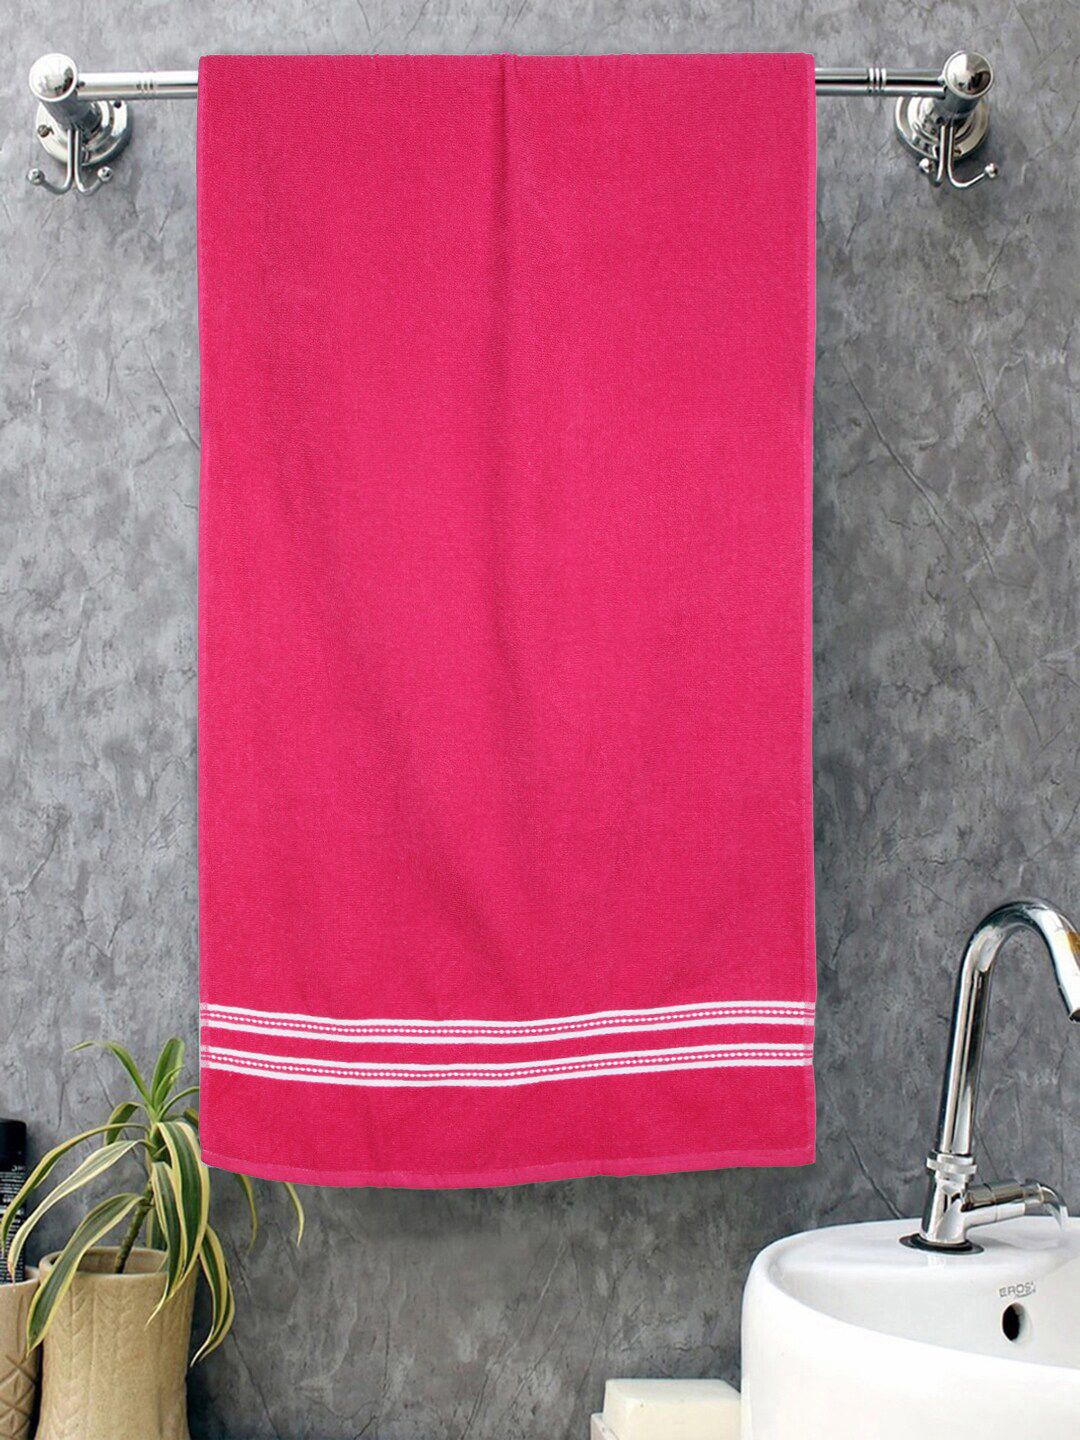 ROMEE Pink Solid Cotton 500 GSM Bath Towel Price in India